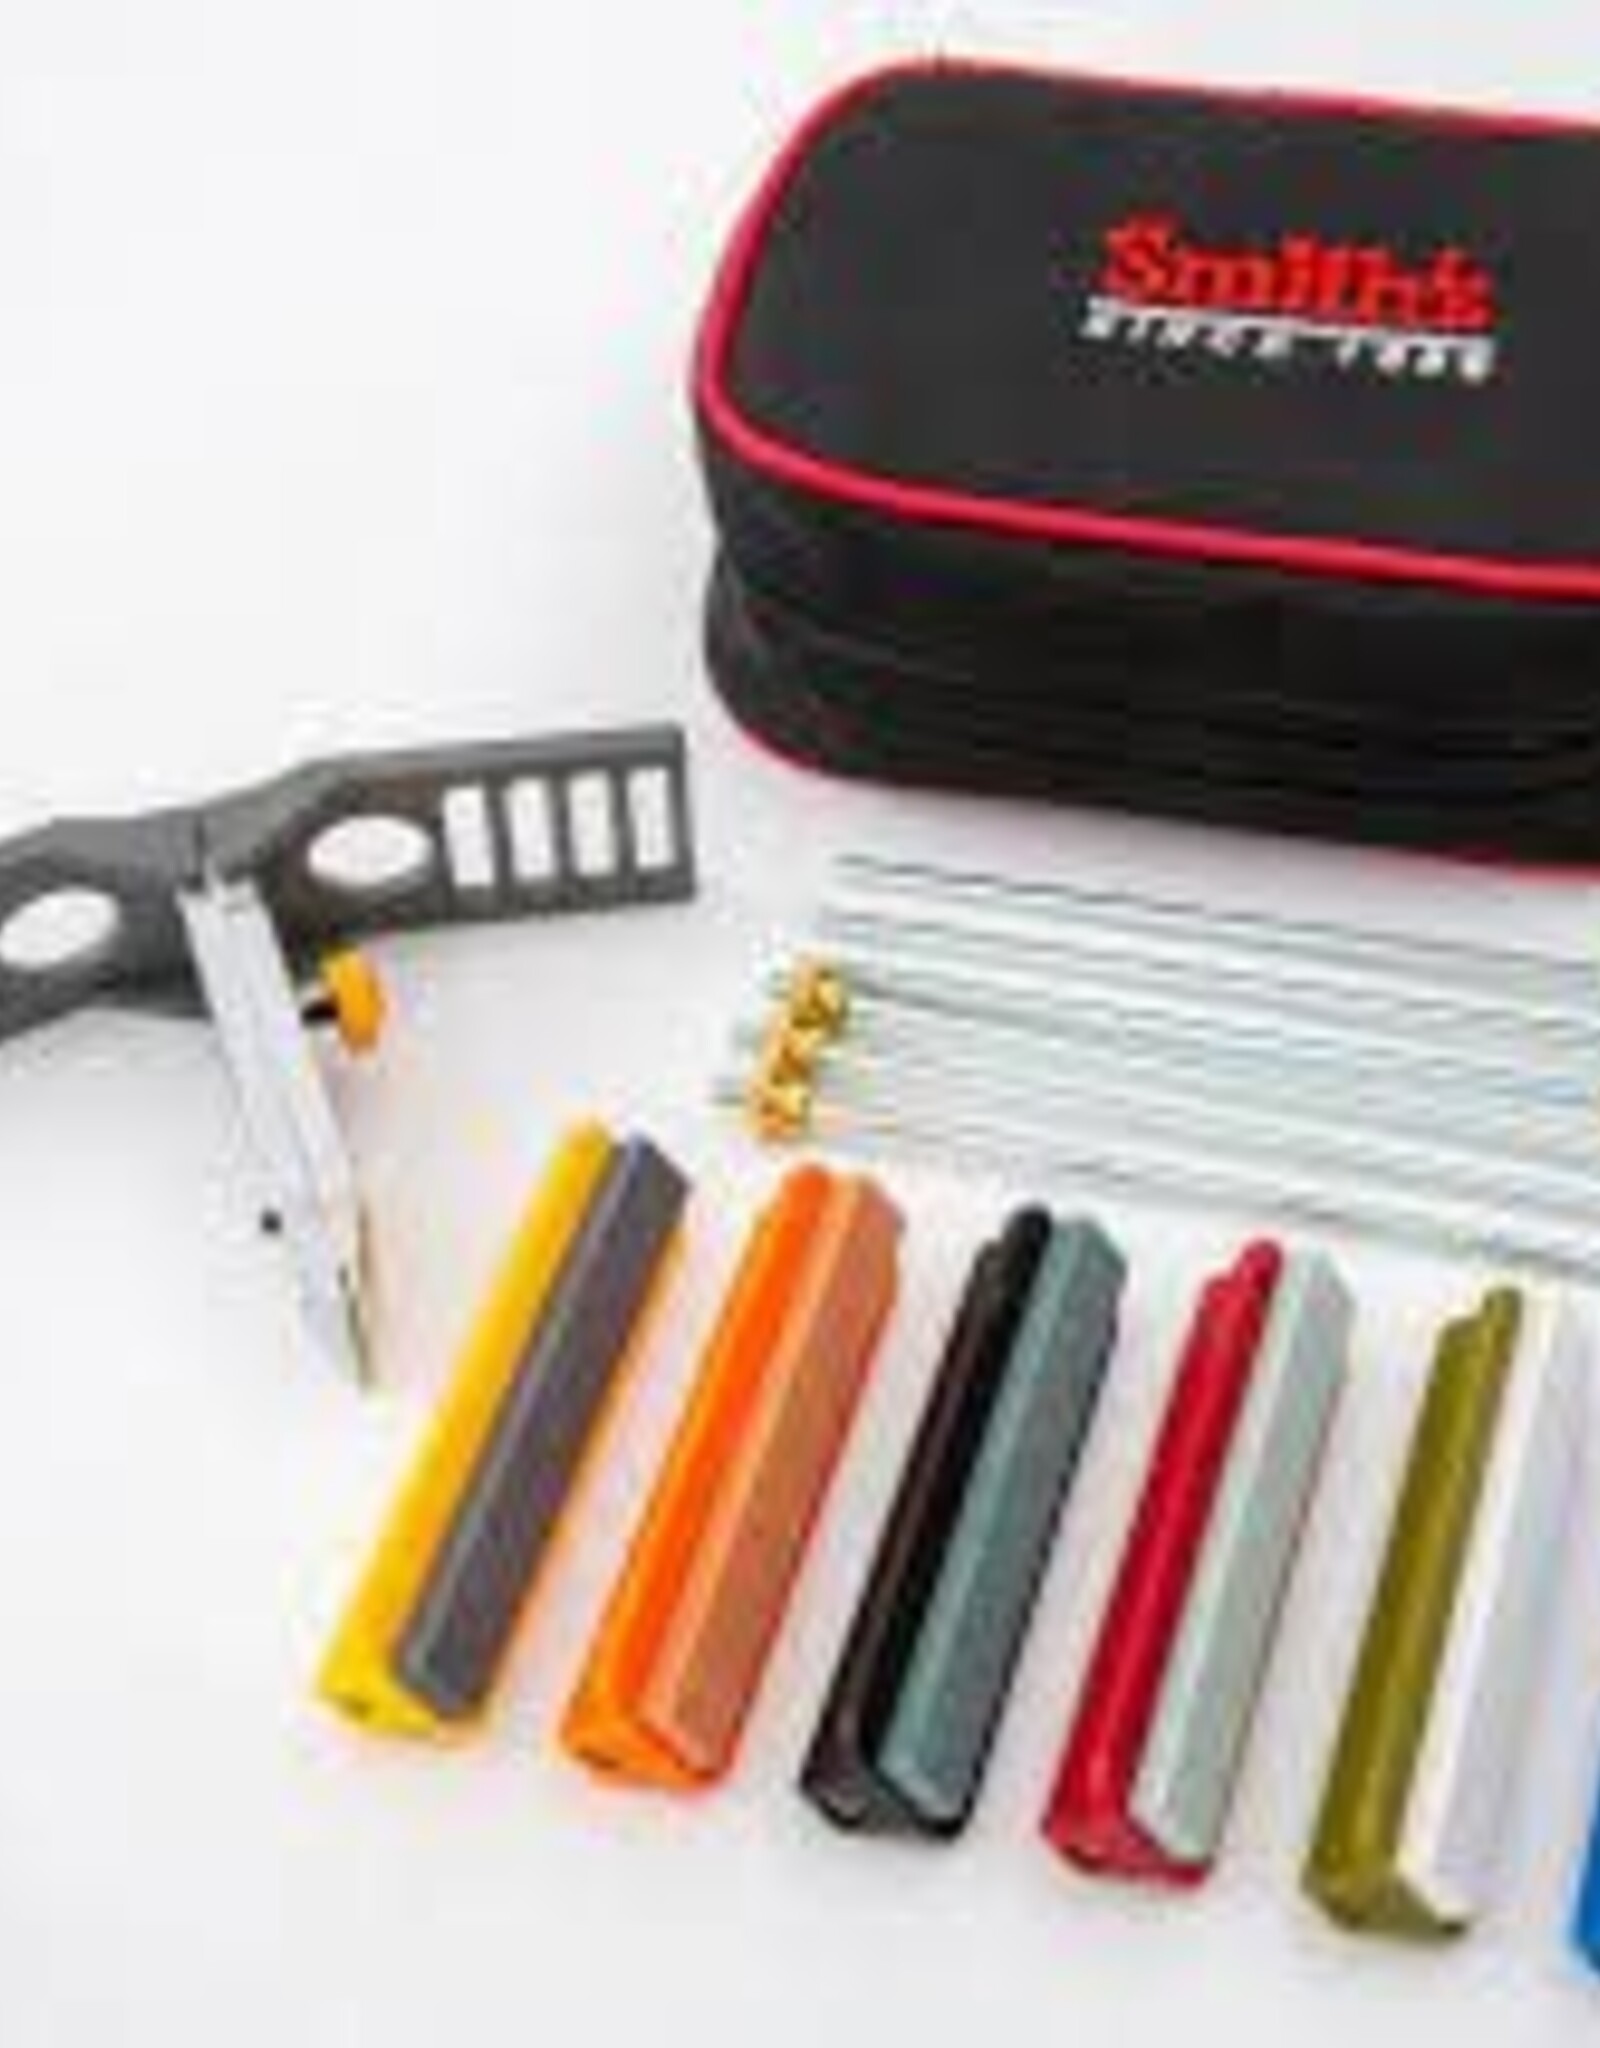 Smith's 6 Stone Precision Knife Sharpening System